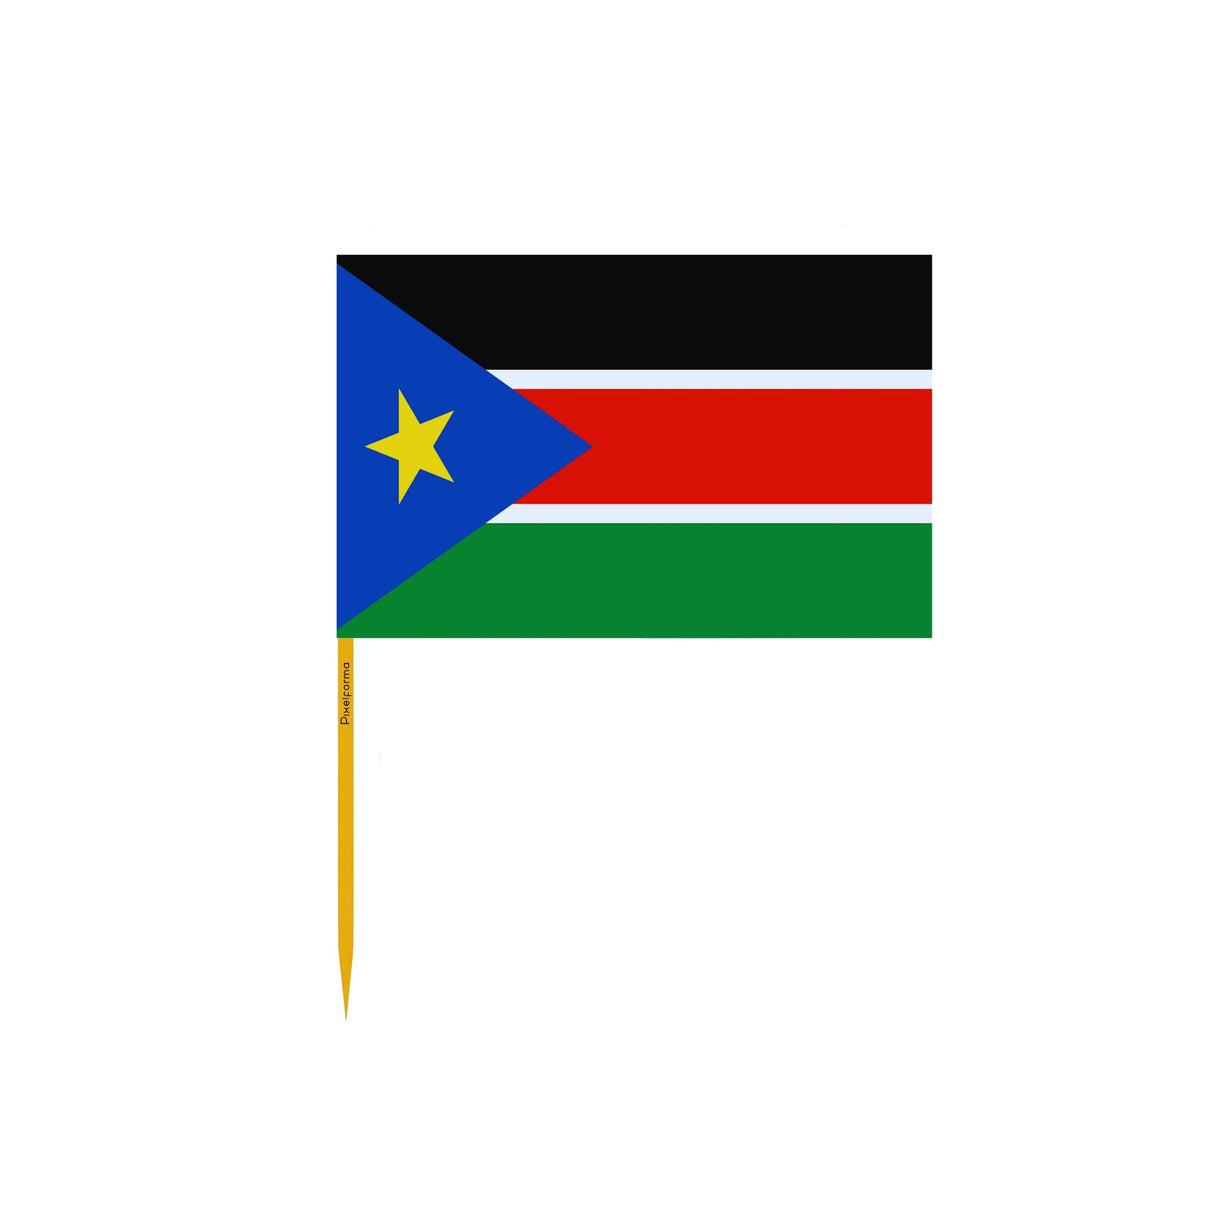 South Sudan Flag Toothpicks in Multiple Sizes - Pixelforma